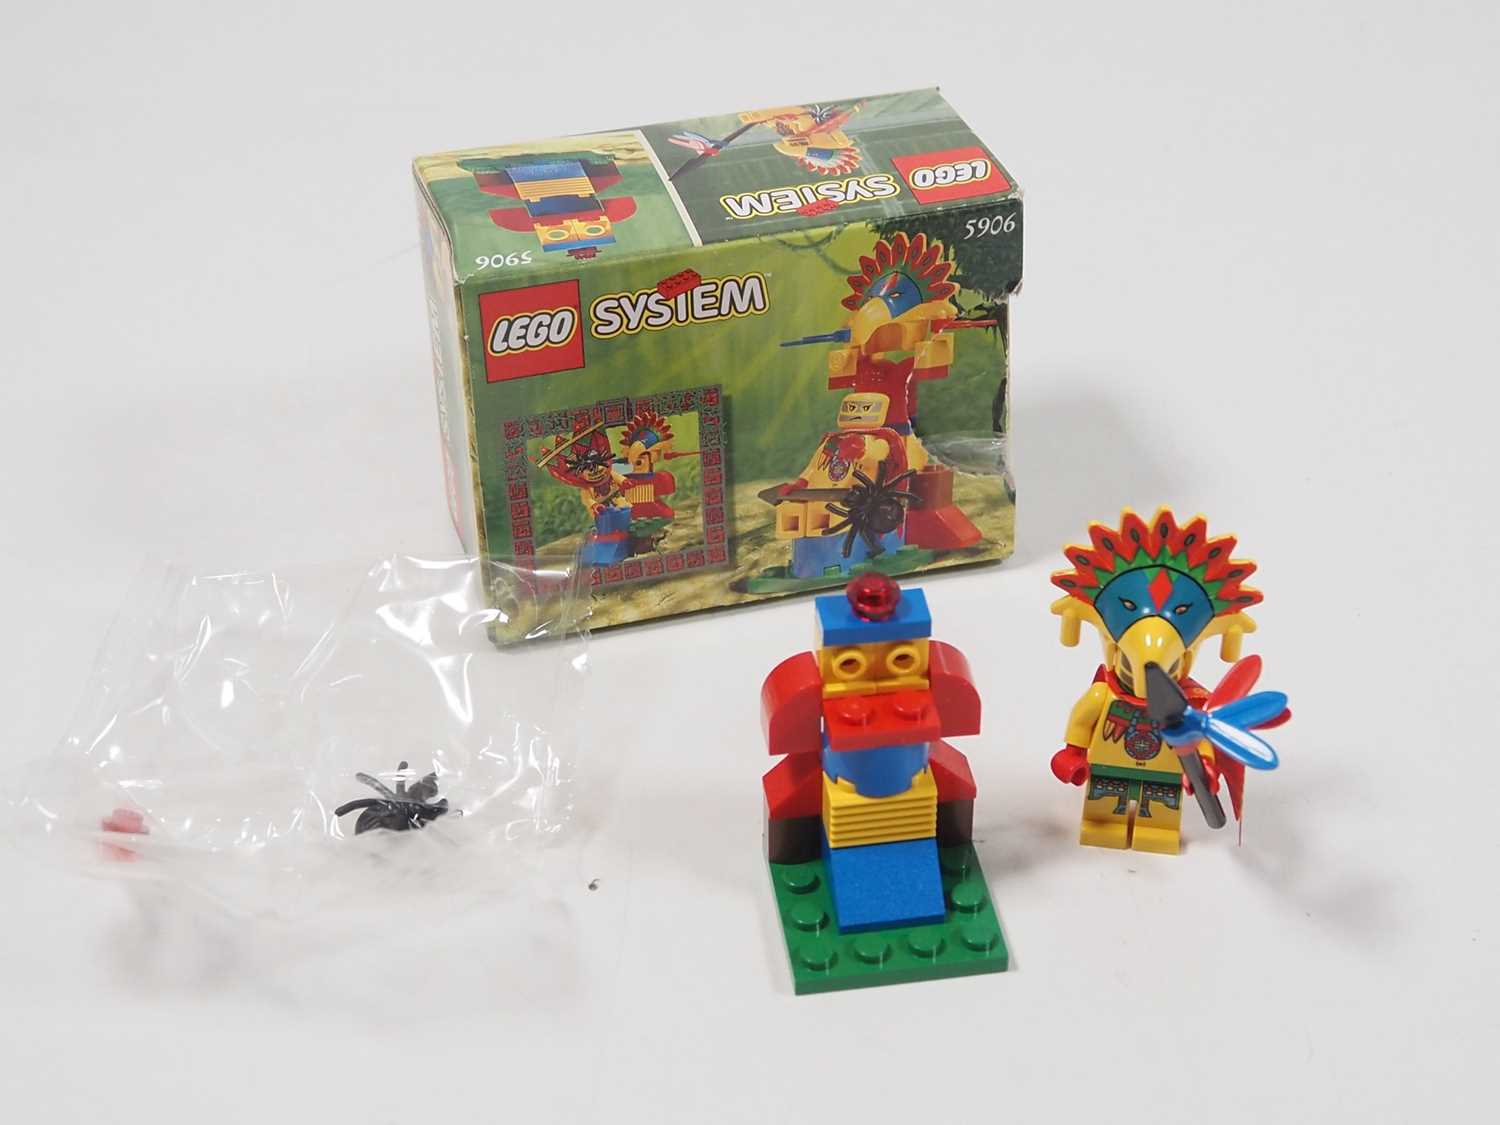 LEGO - ADVENTURERS - A group of three sets #5901 River Raft (boxed), #5906 Ruler of the Jungle (